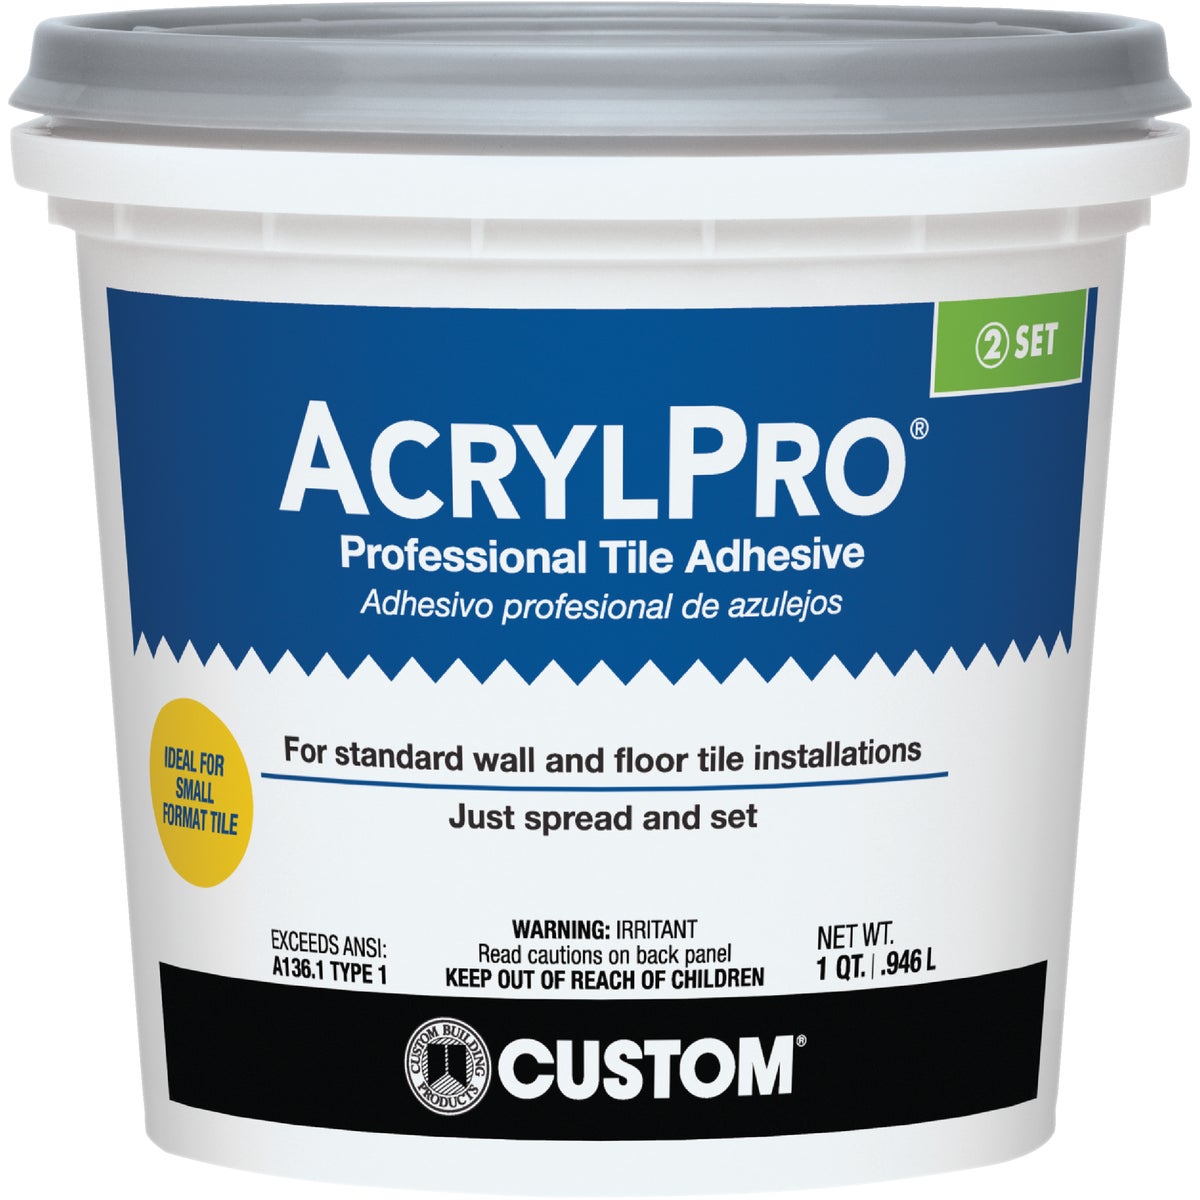 Item 267813, AcrylPro Ceramic Tile Adhesive is a professional formula adhesive with high